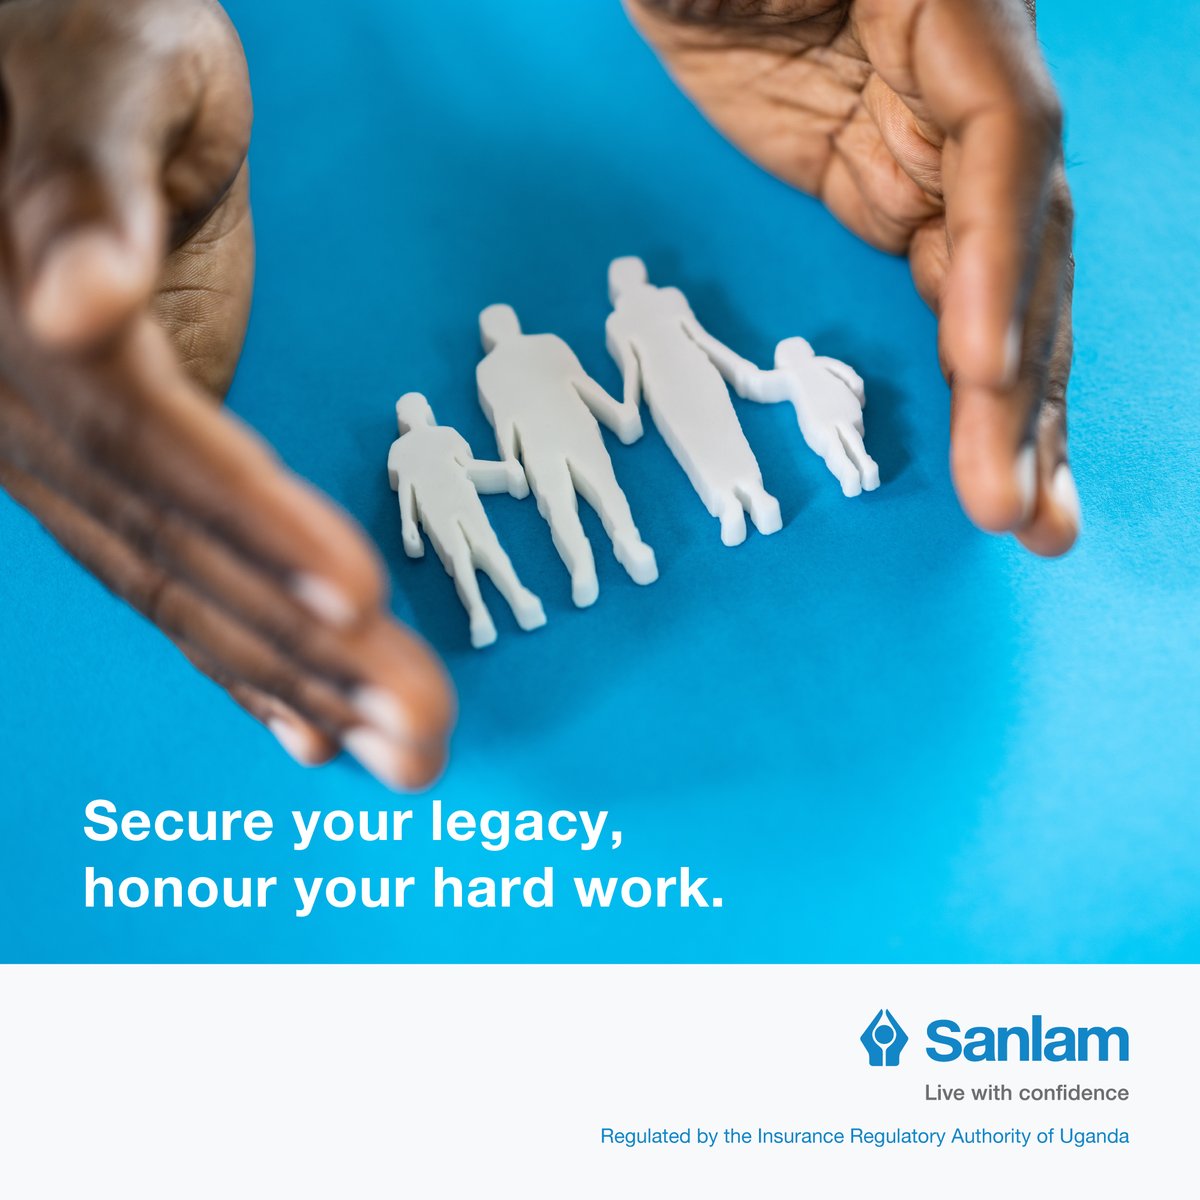 Sanlam's Life Insurance policy is a strategic financial instrument that will provide financial security and protect the legacy of the insured individual and their loved ones. Want one today? Contact us via WhatsApp at 0712726526 or reach out to us by calling 0323526526.…